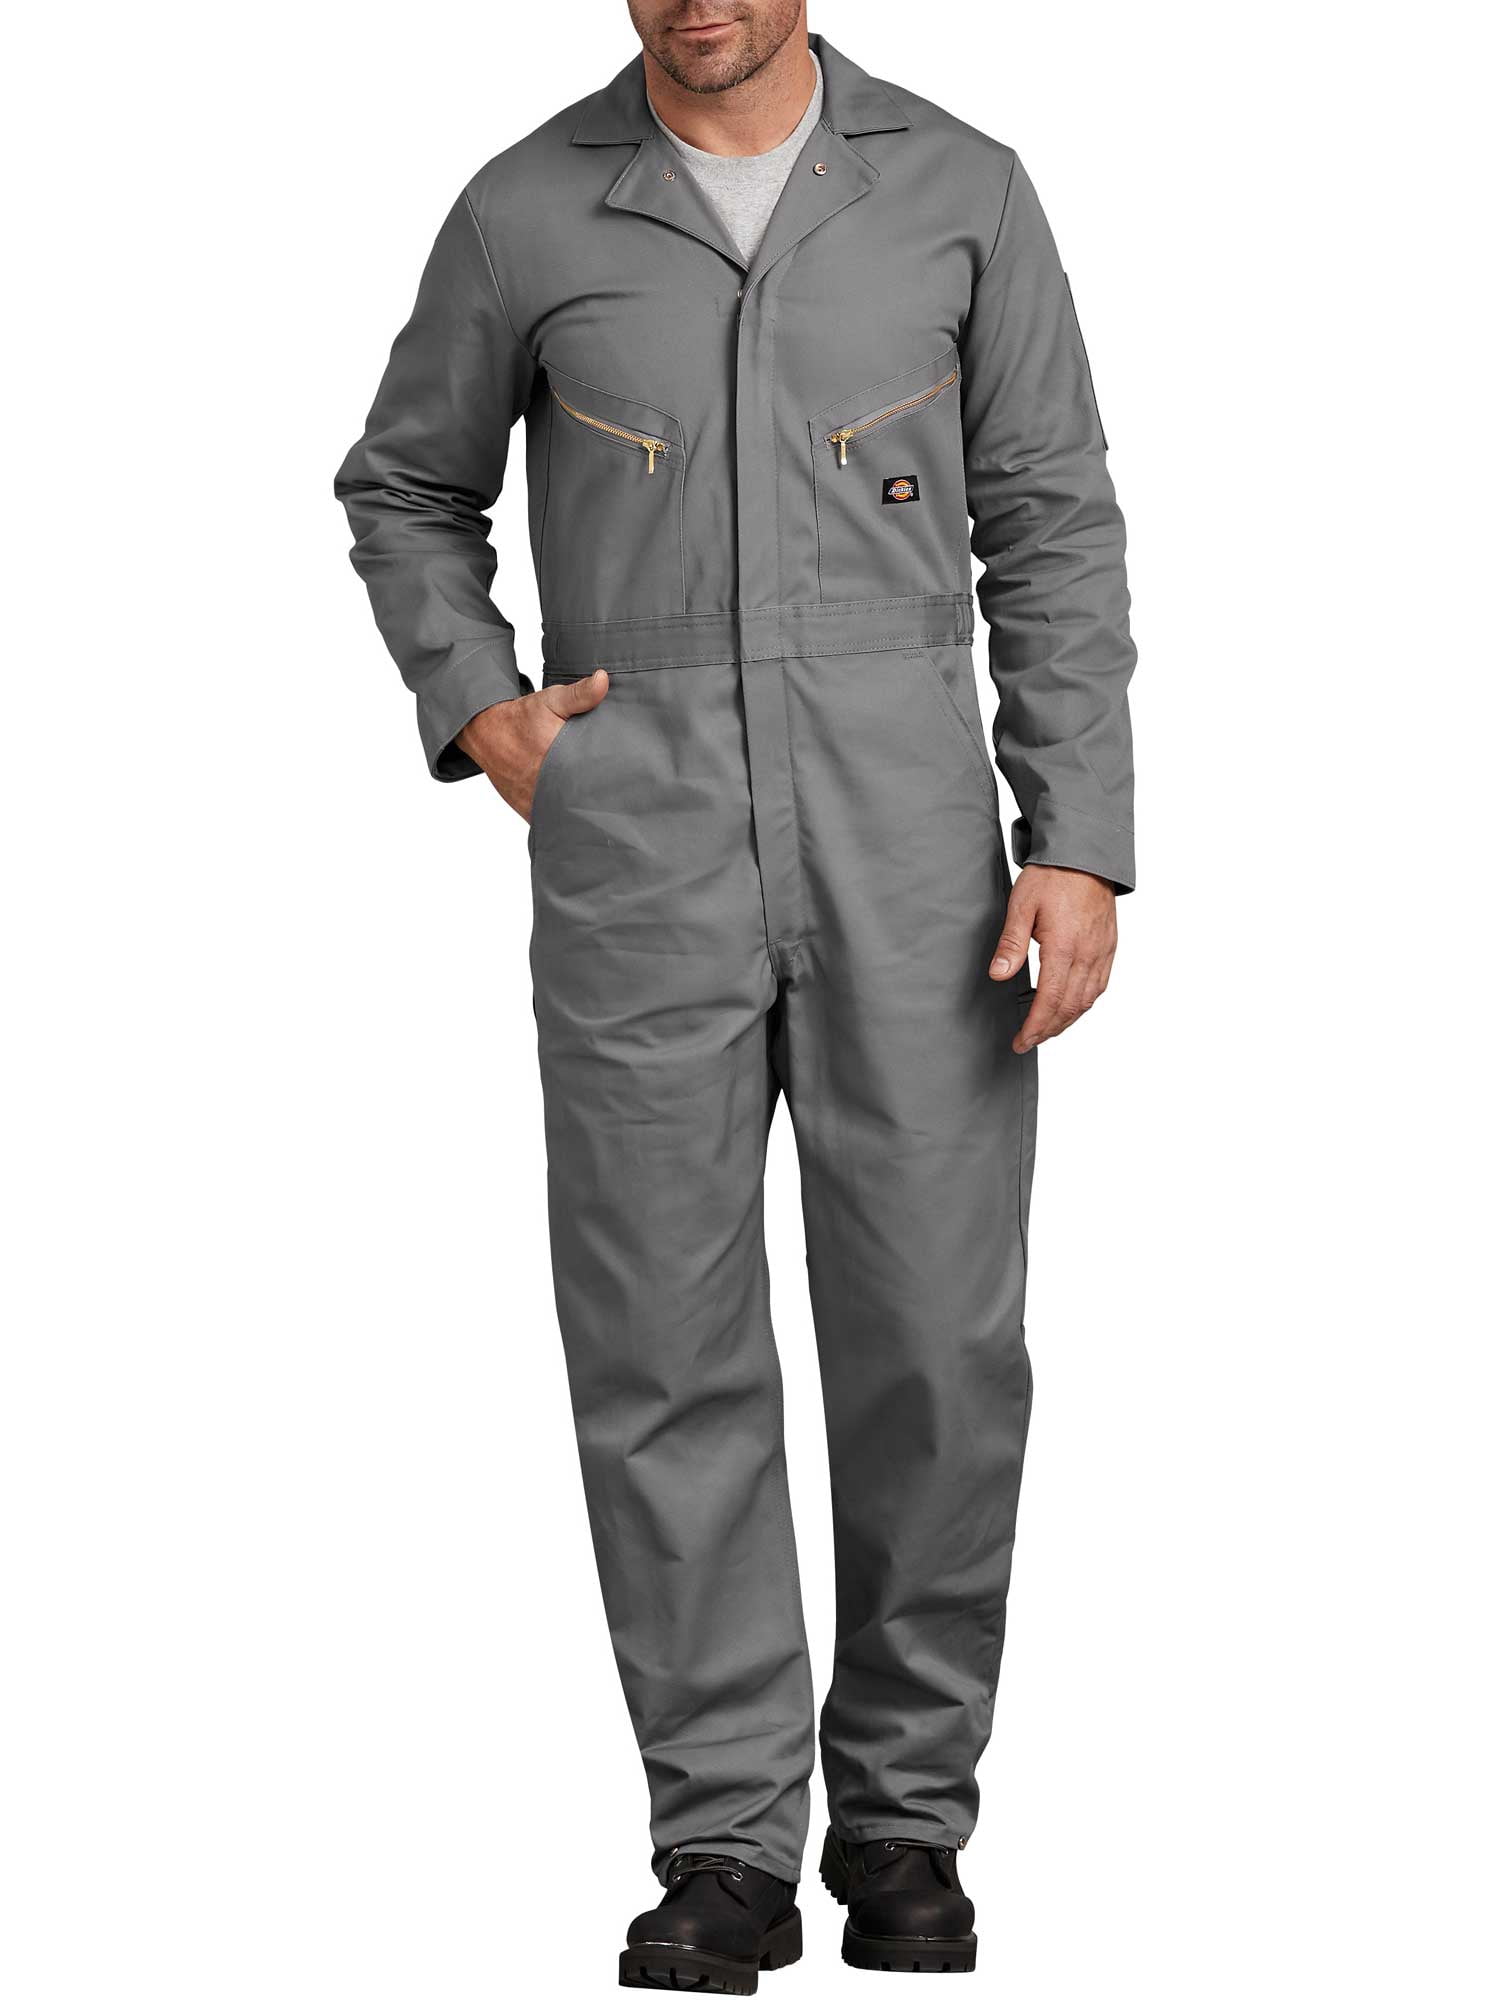 PORTWEST Euro Polycotton Mechanic Jumpsuit Coverall S999 — Safety